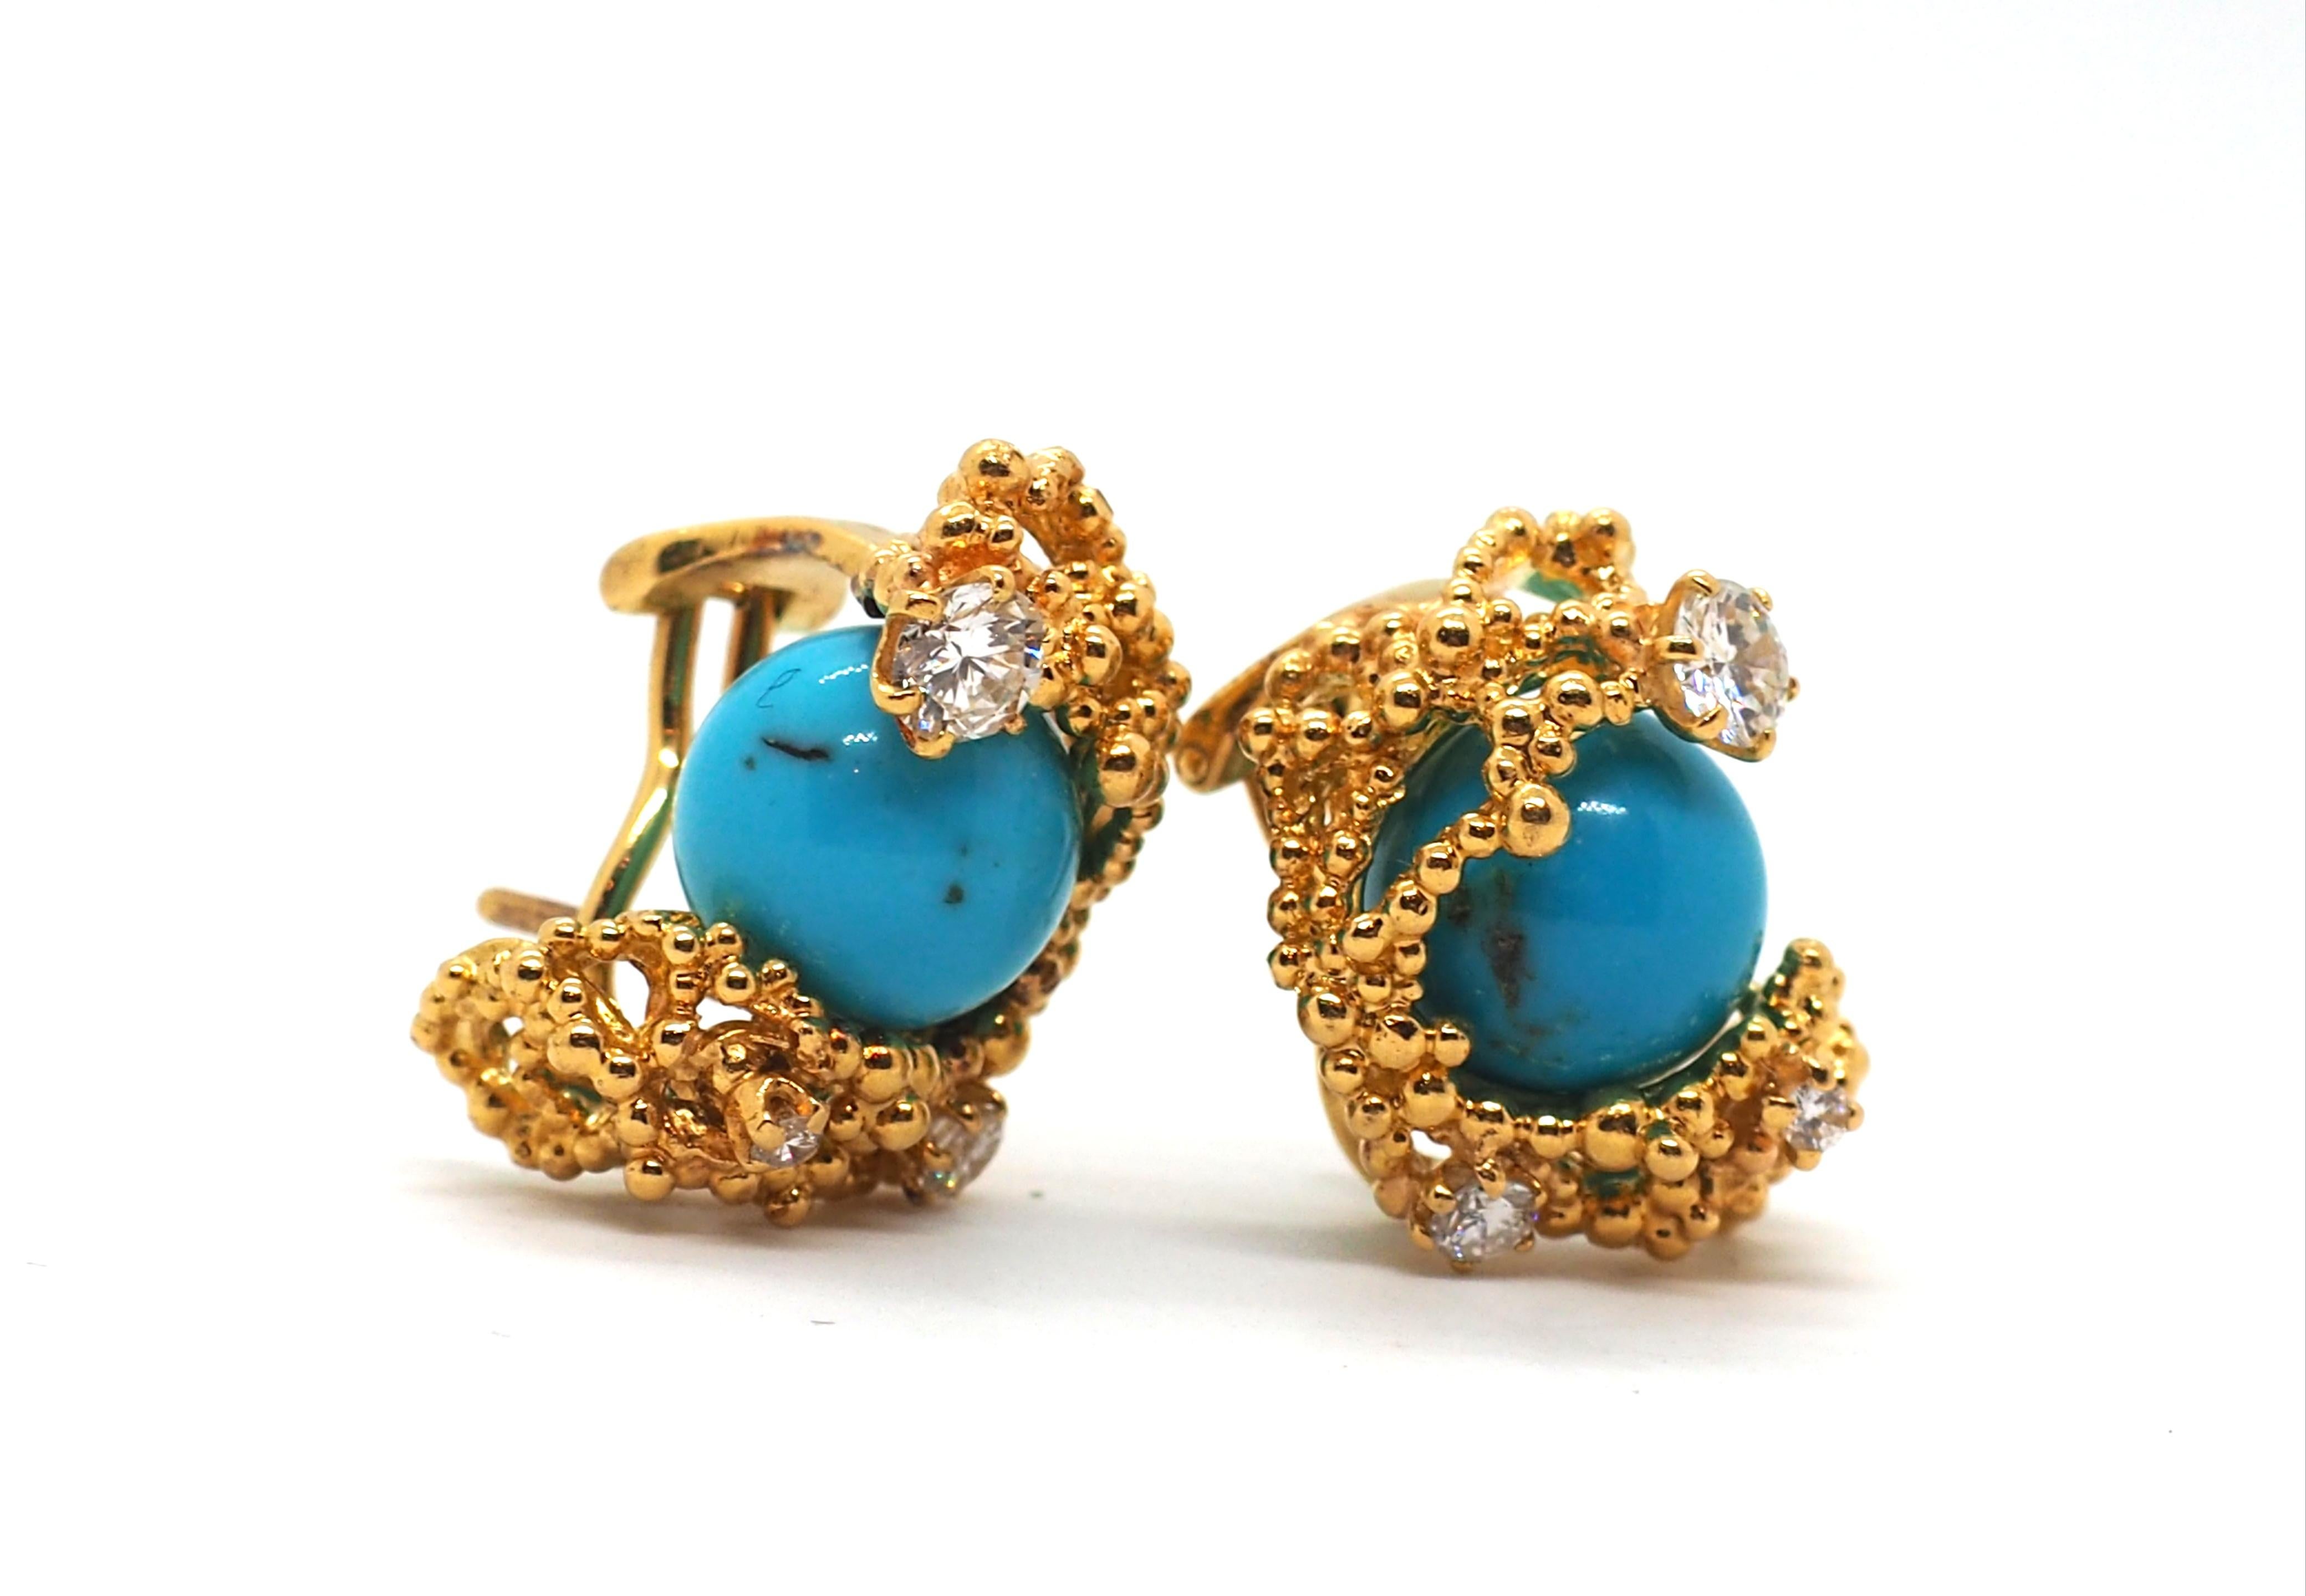 Gilbert Albert  clip earrings from the collection of interchangeable bills, made up of of free formed textured 18 karats yellow gold, decorated with 3 round shape diamonds each, about 0,76 carats. 
The earrings come with 5 different balls of your